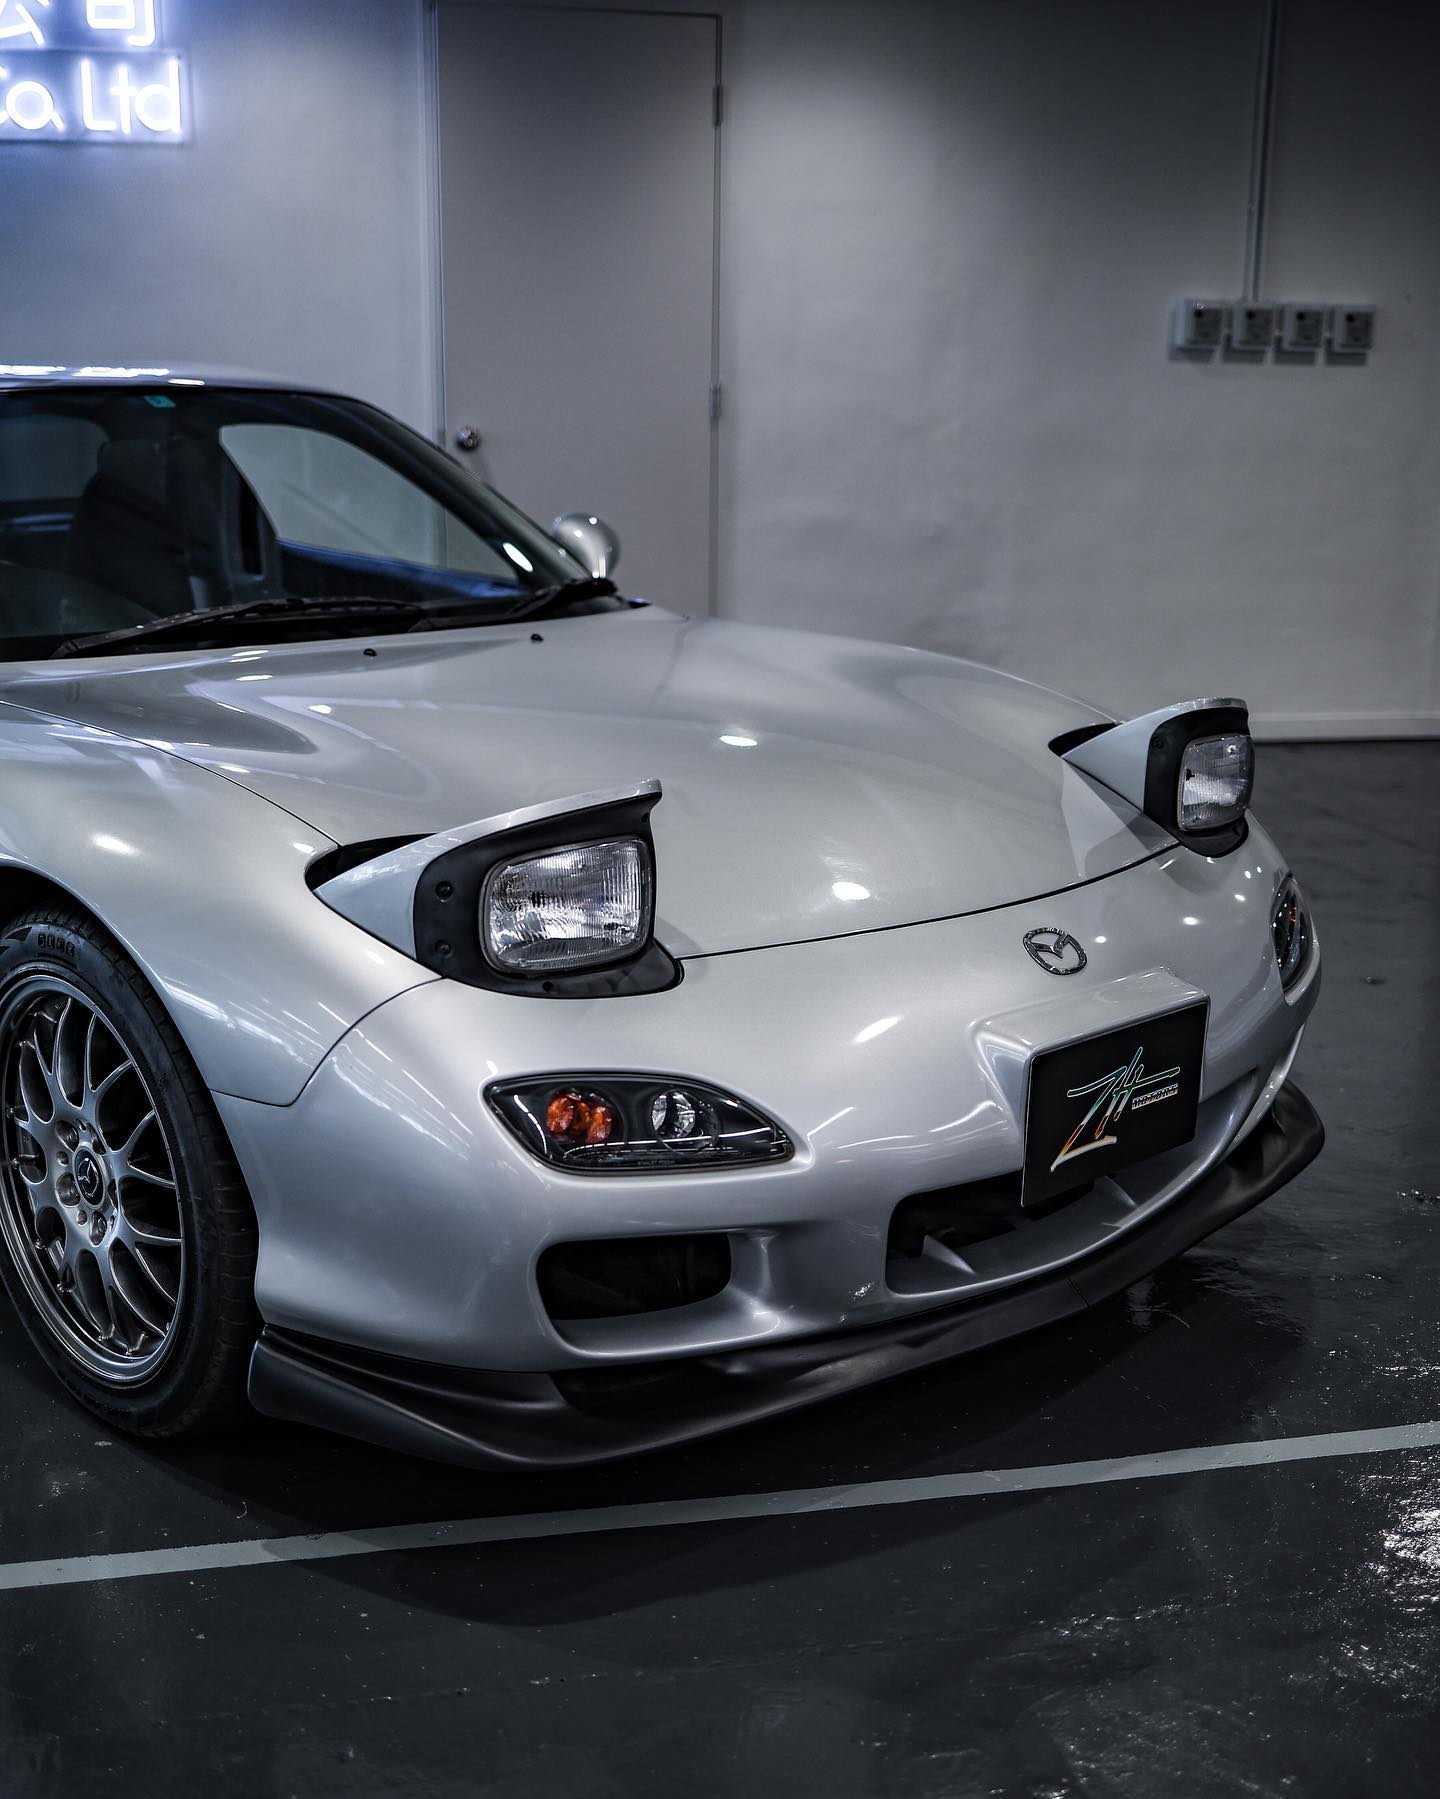 2000 Mazda RX7 FD3S TYPE RS